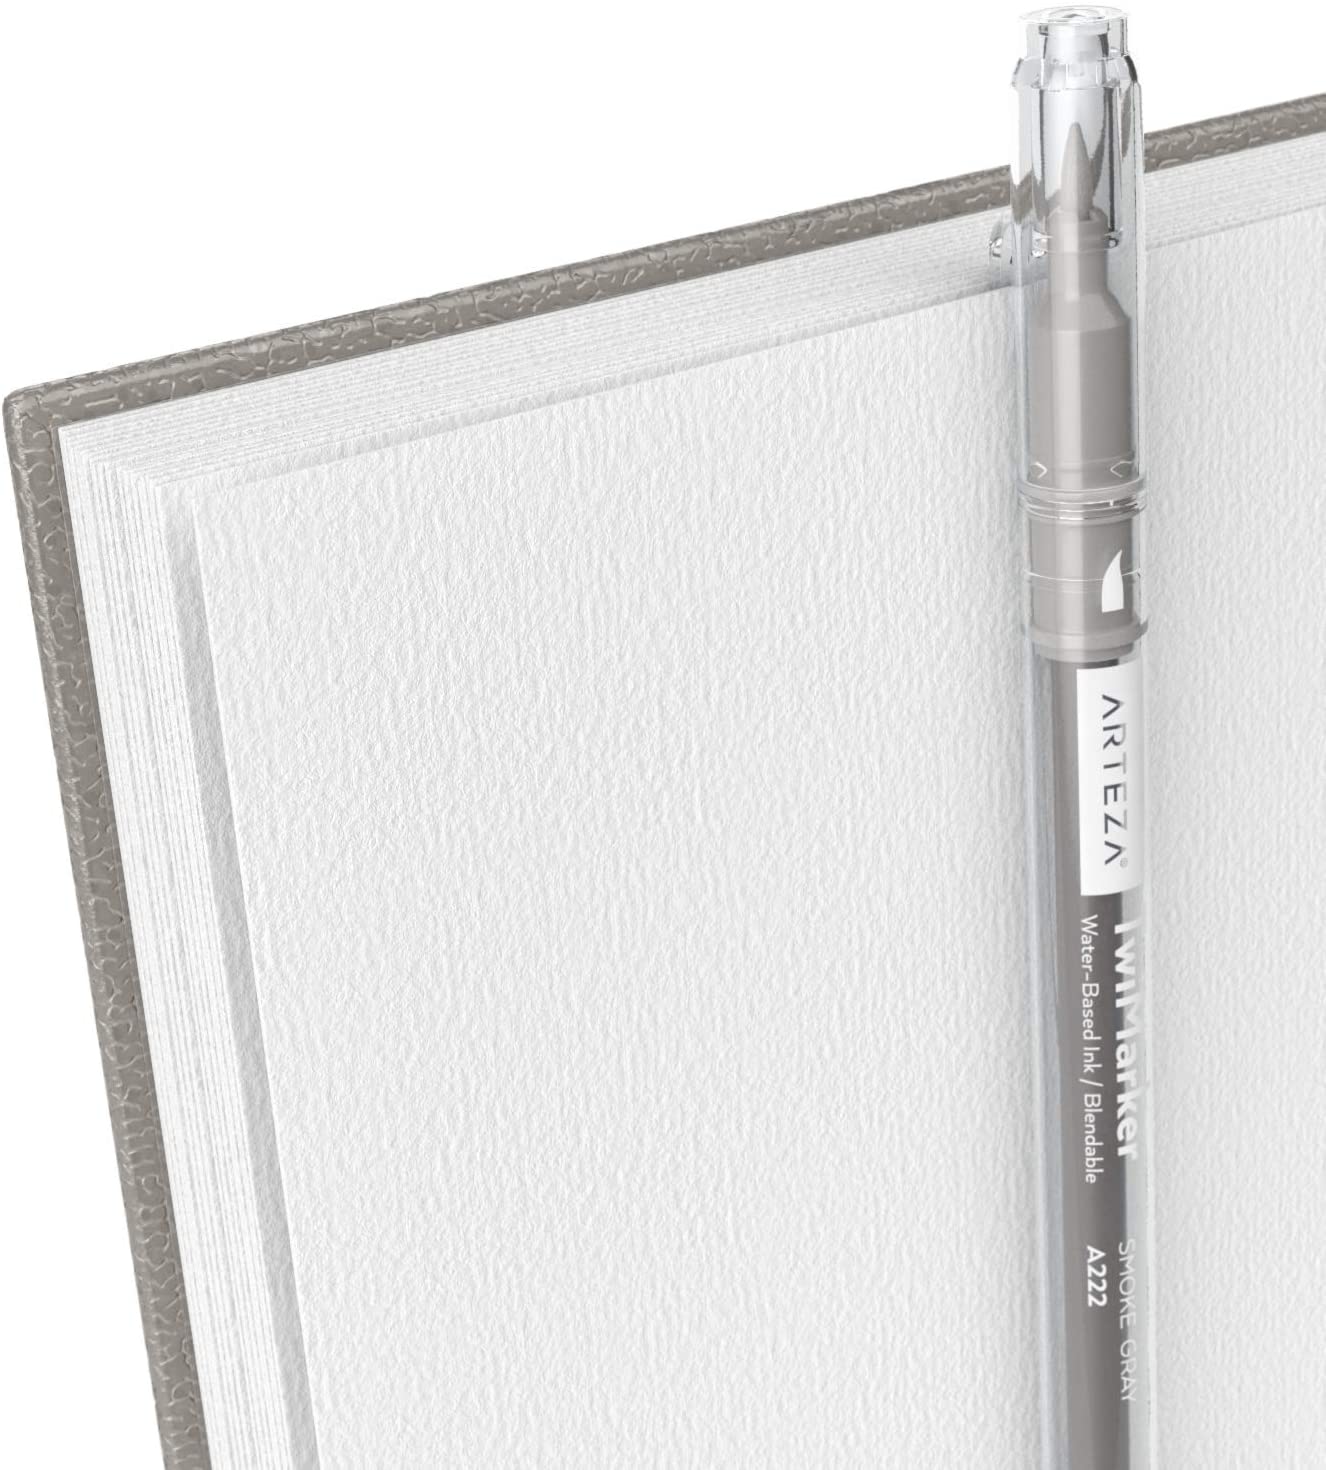 Watercolor Book, Spiral-Bound Hardcover, Gray, 5.5 x 8.5” - Pack of 3